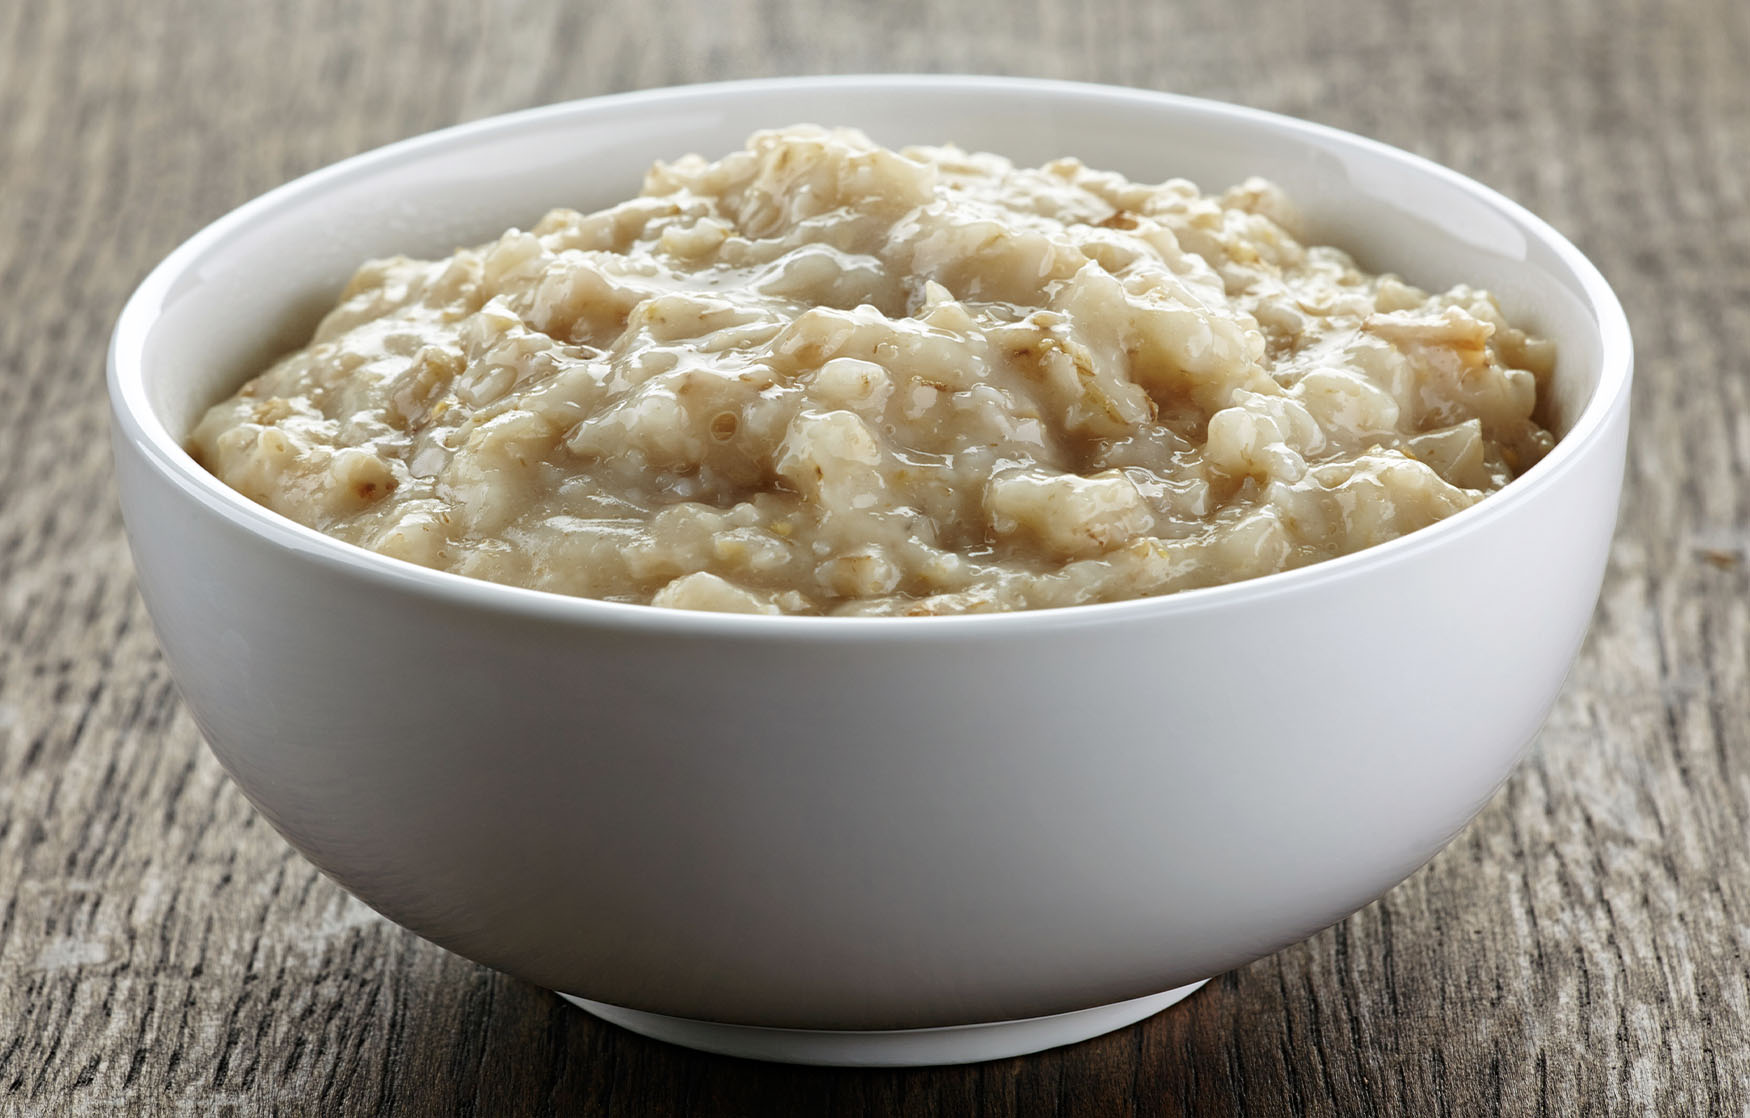 If you have any of this oatmeal, throw it out now – BGR